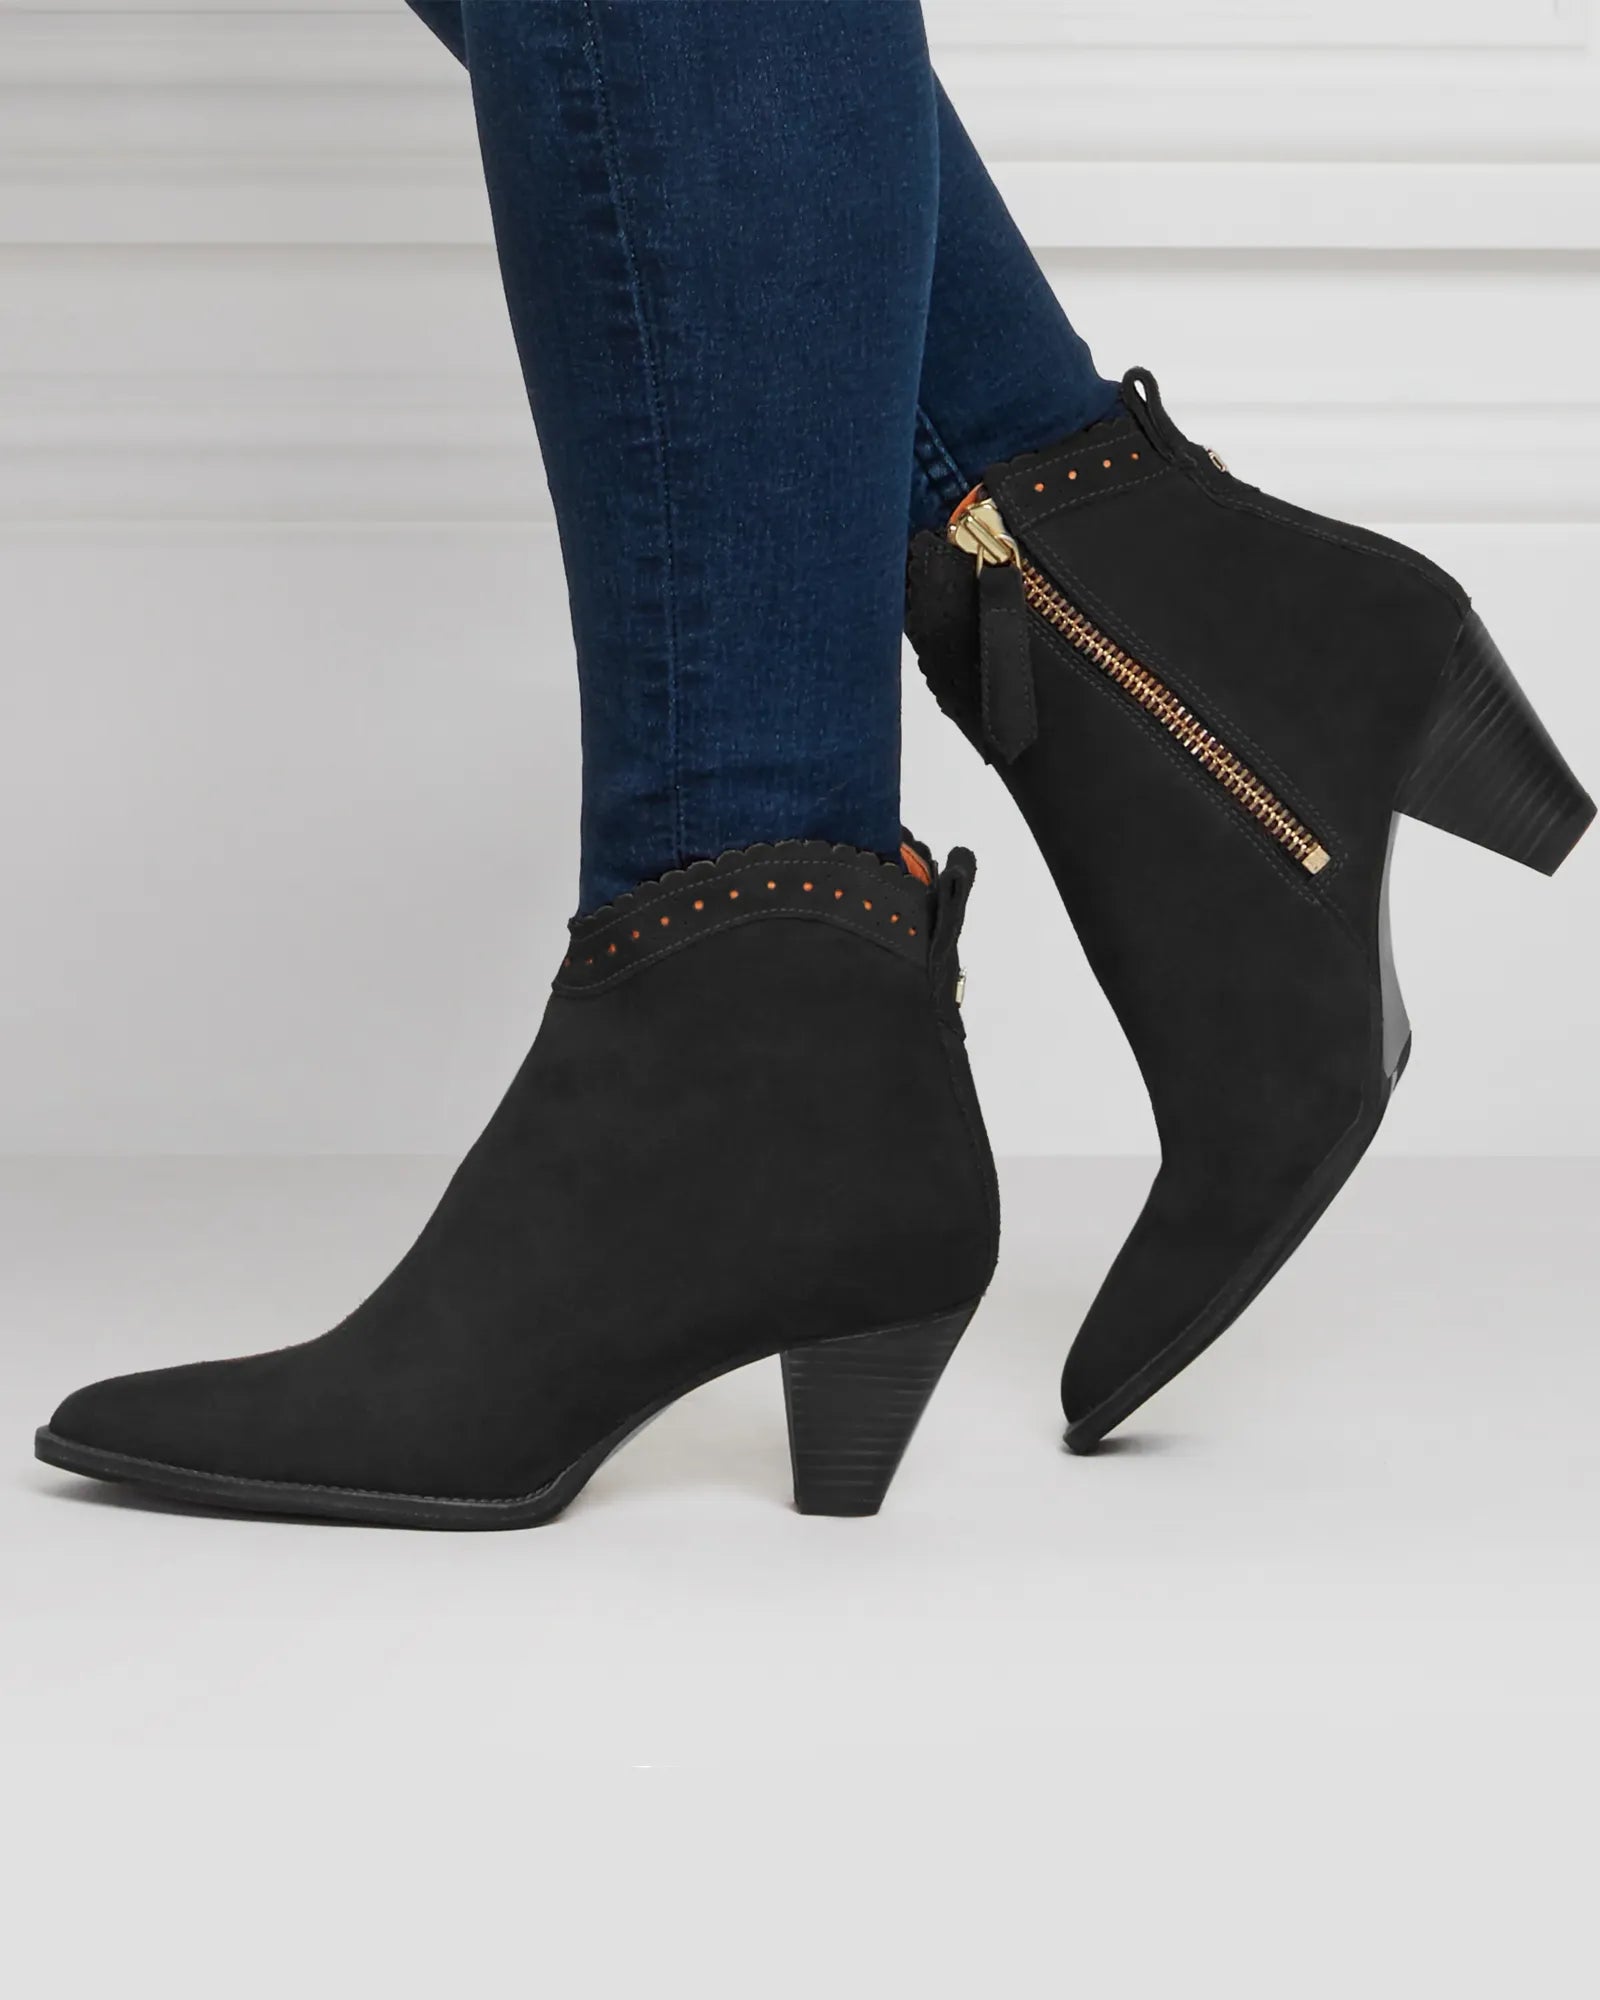 The Regina Ankle Boot in Black Suede